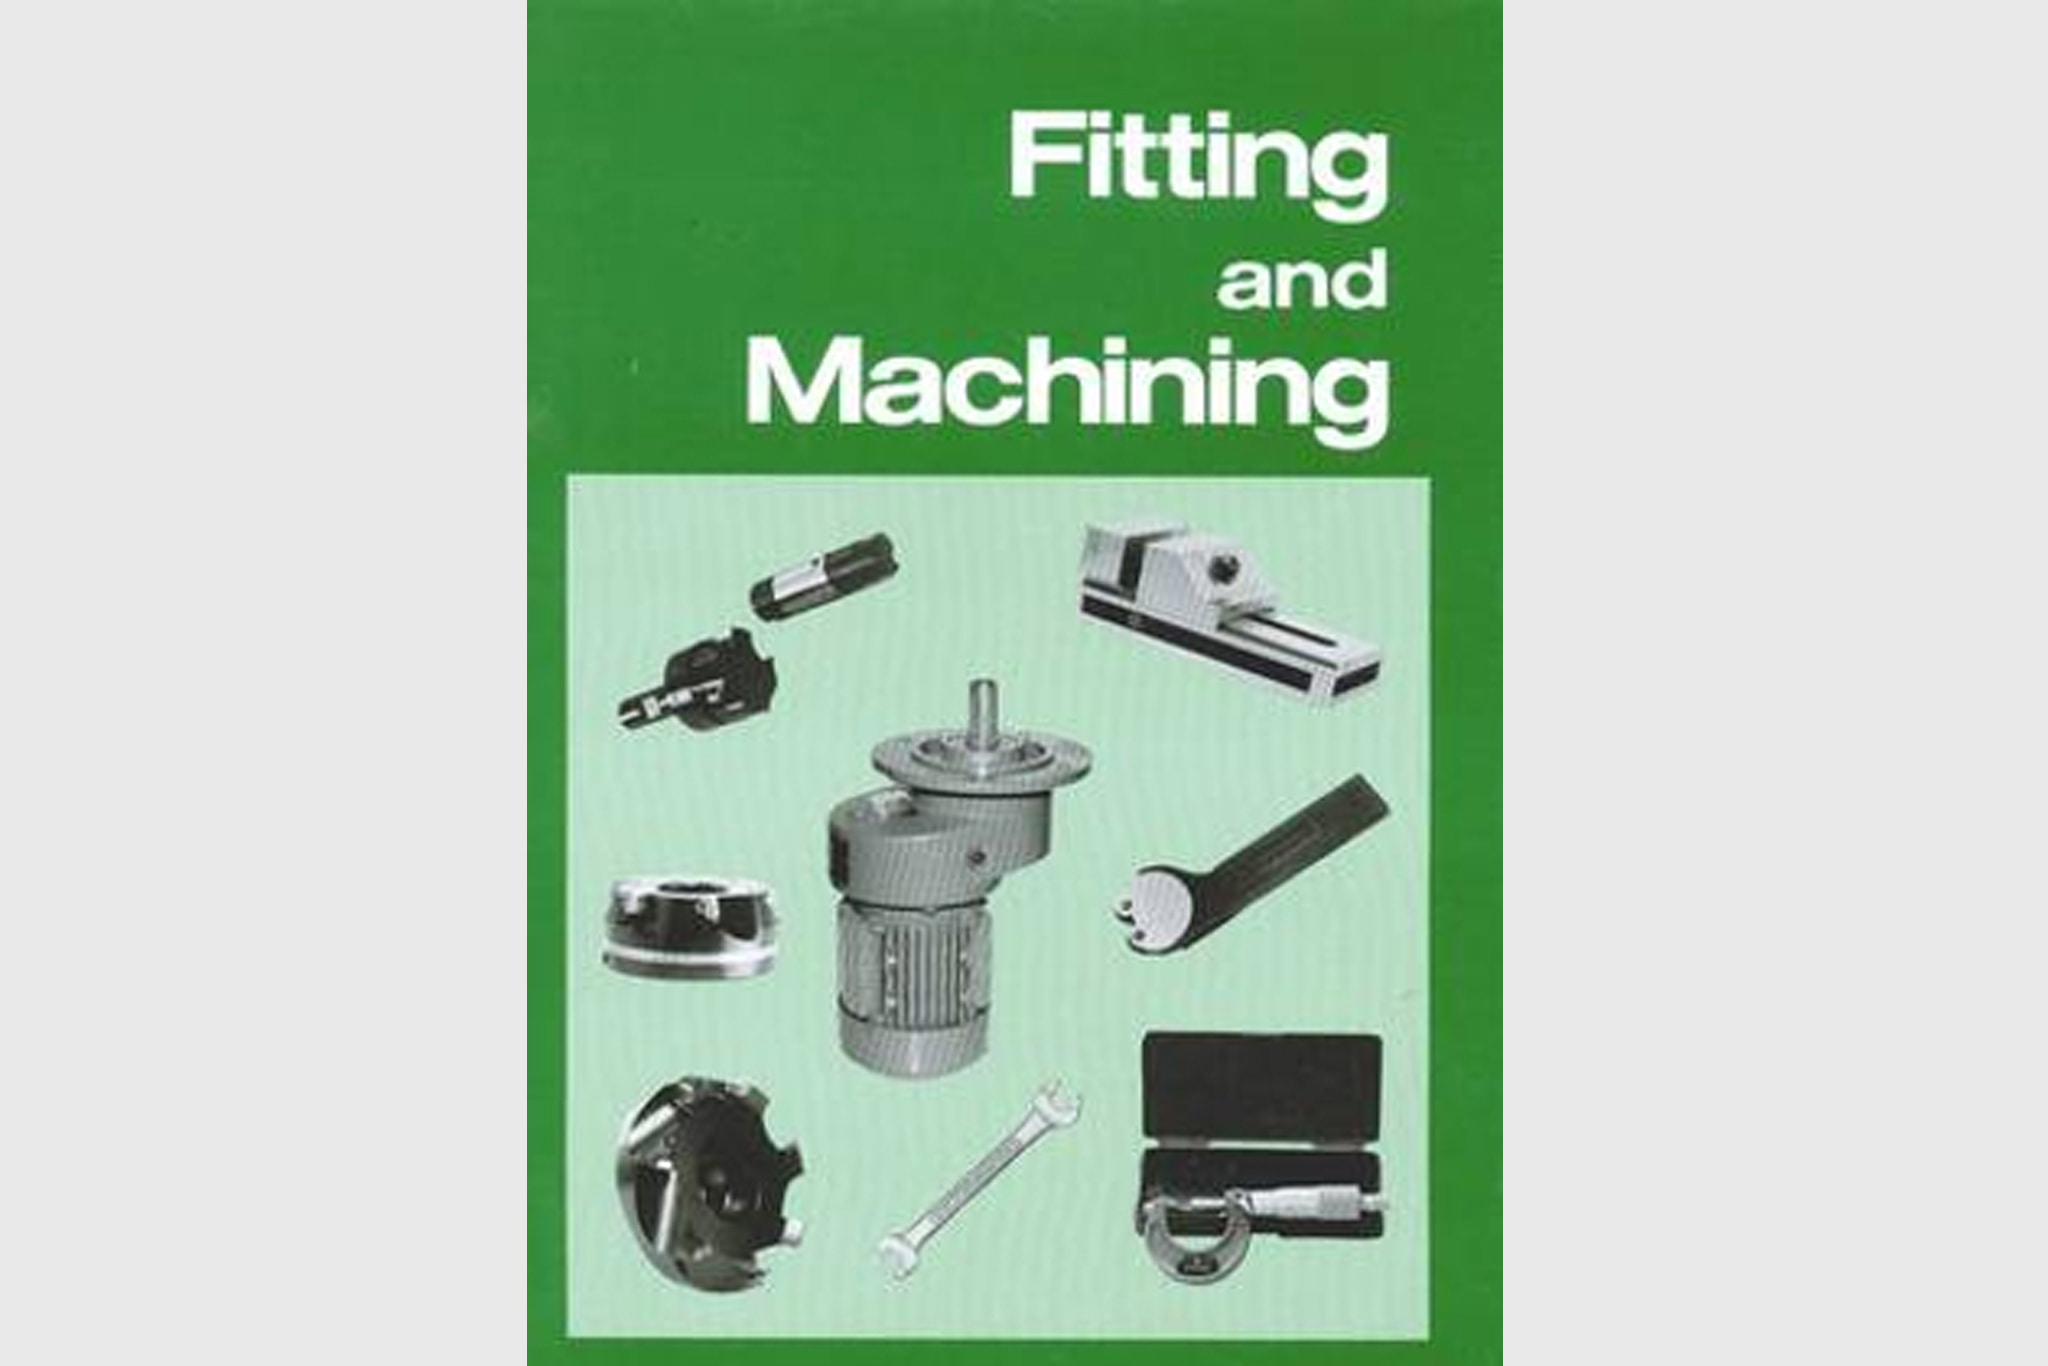 Fitting and machining book cover